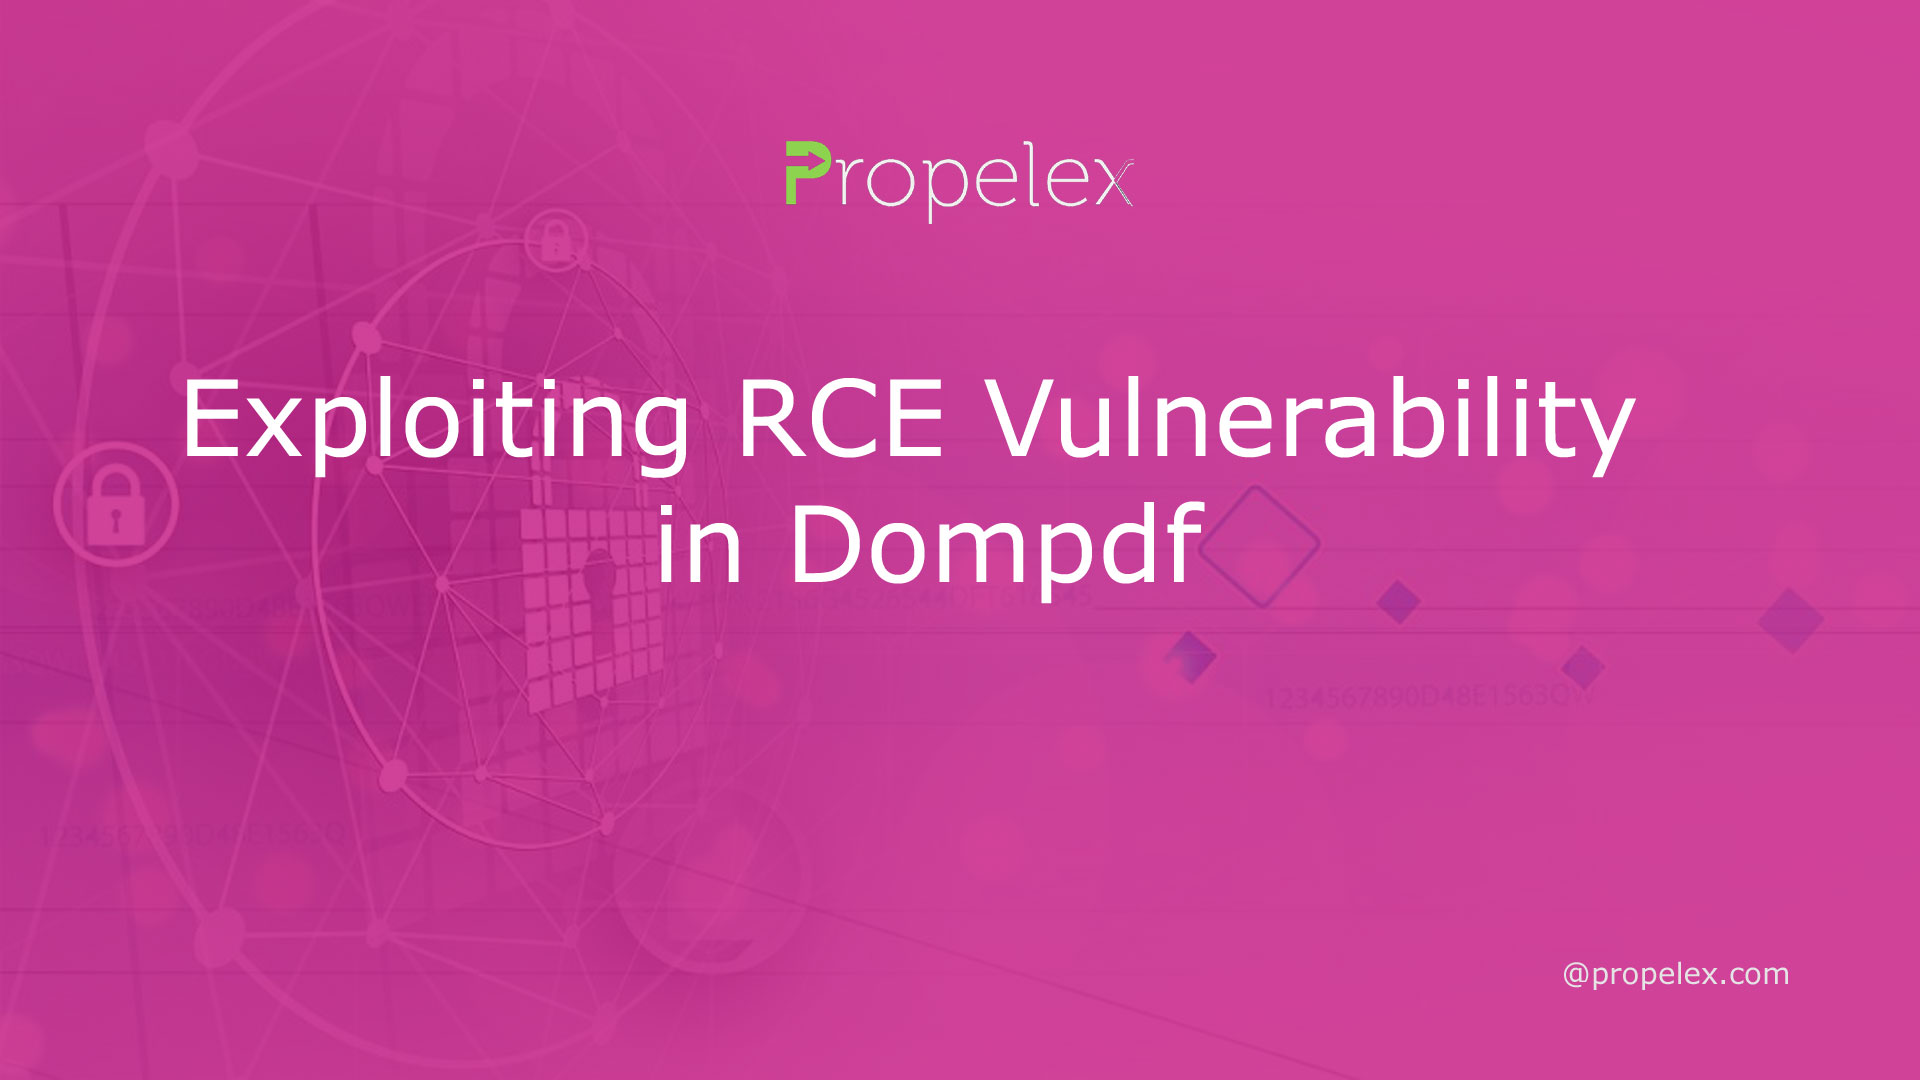 Exploiting RCE Vulnerability in Dompdf